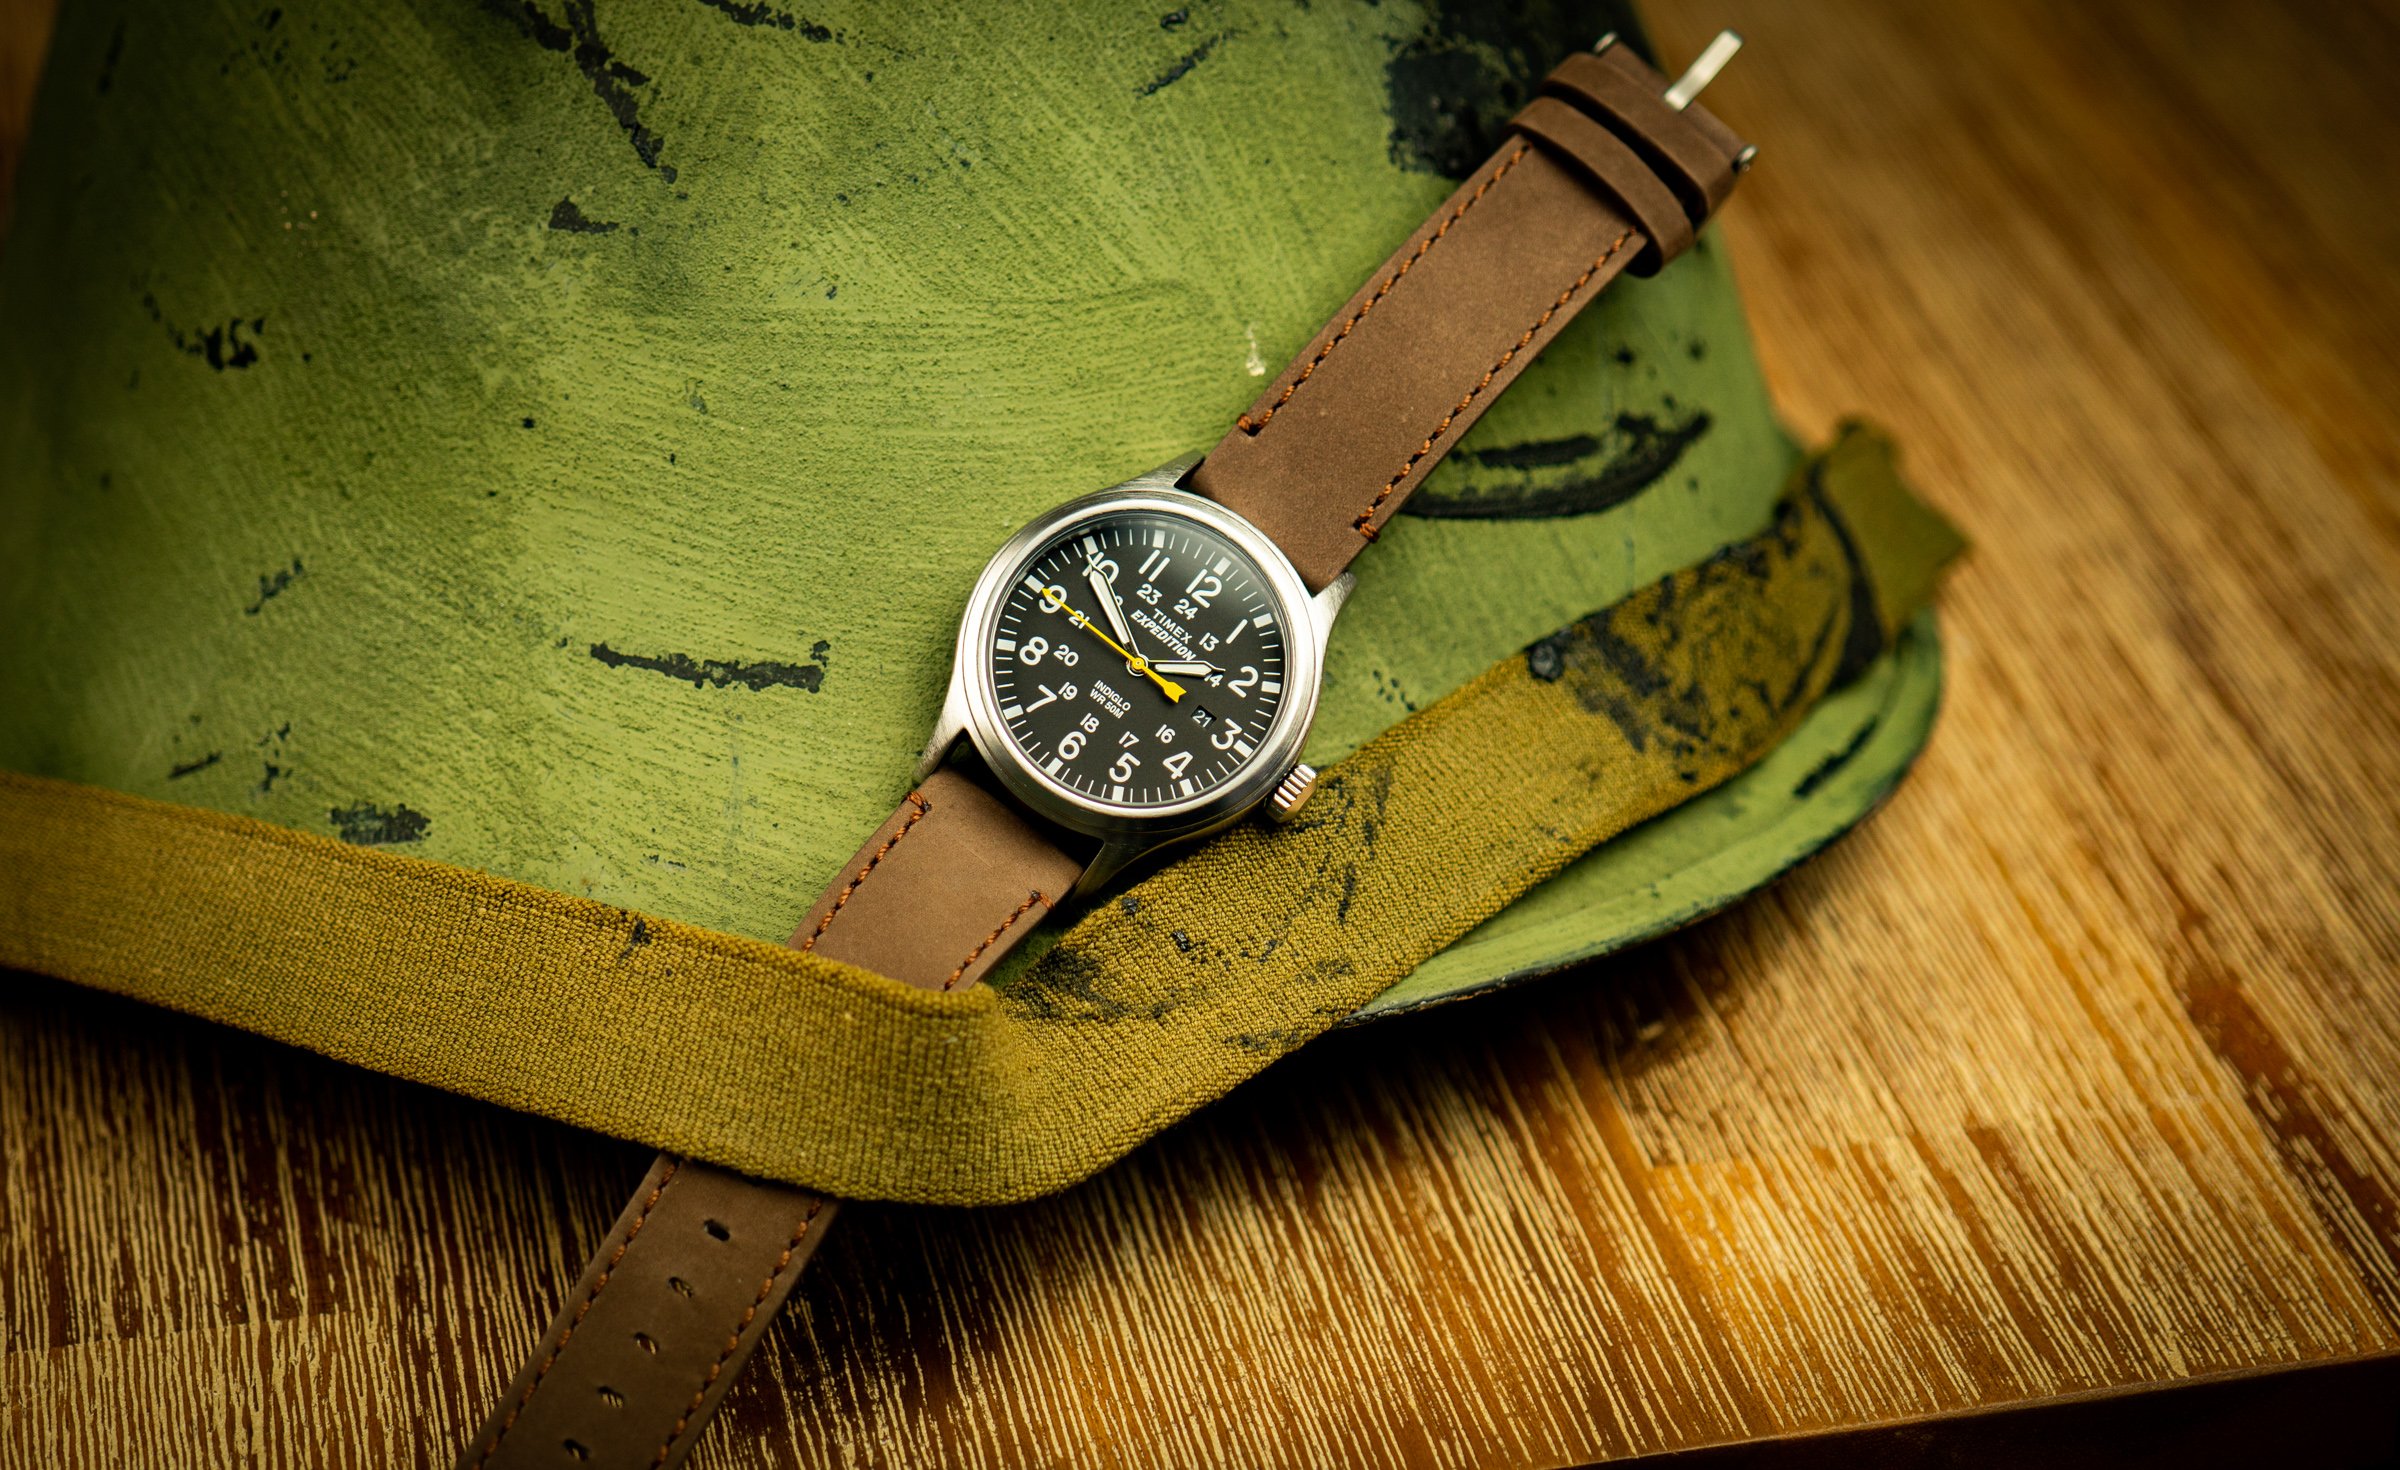 Timex-Expedition-Scout-Militär-Uhr-Field-Watch